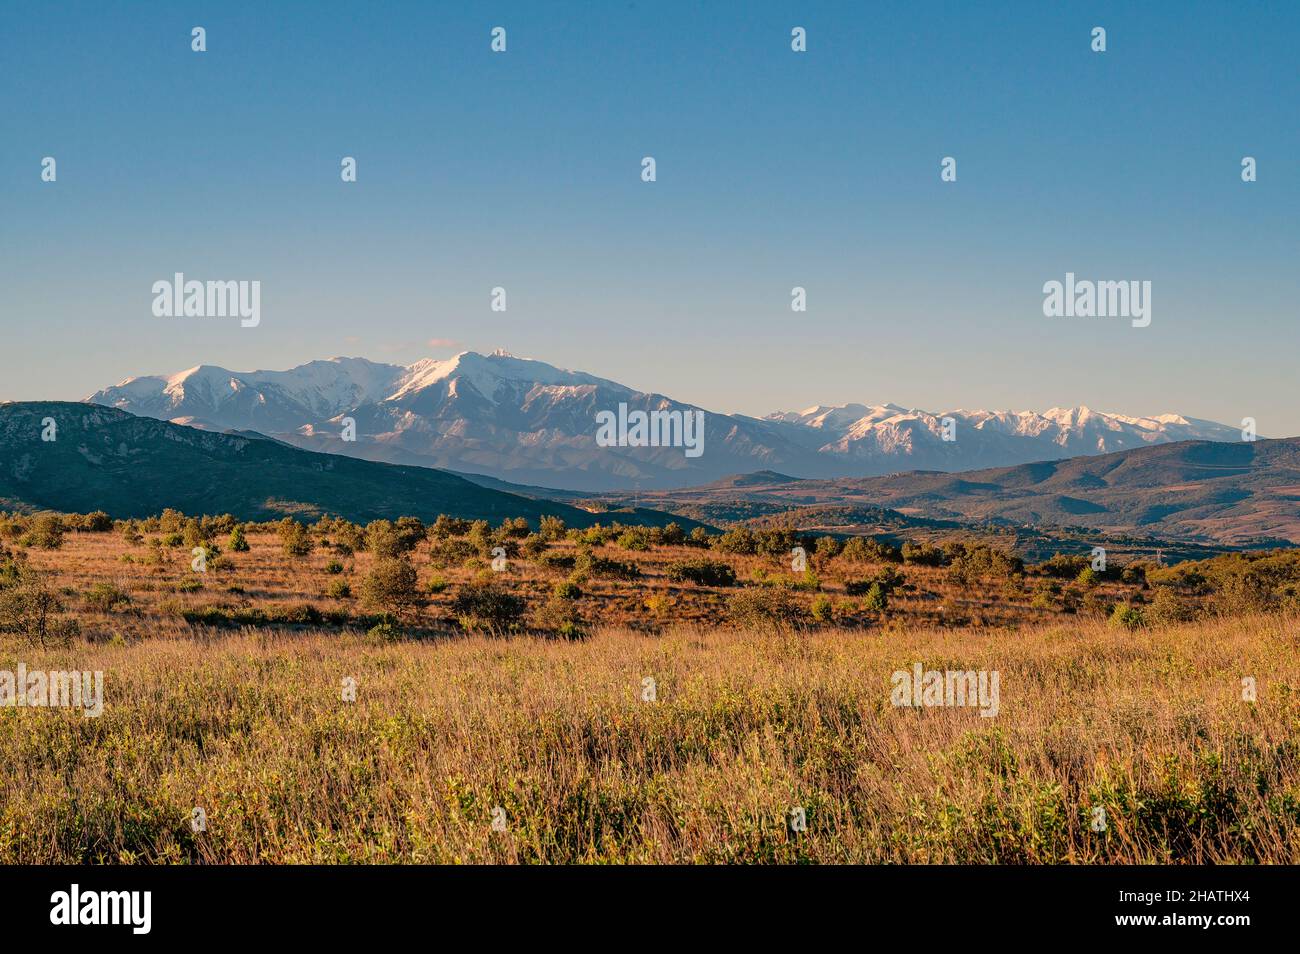 The Canigou mountain seen from the hiking trail from Cases-de-Pena to Tautavel. . Stock Photo